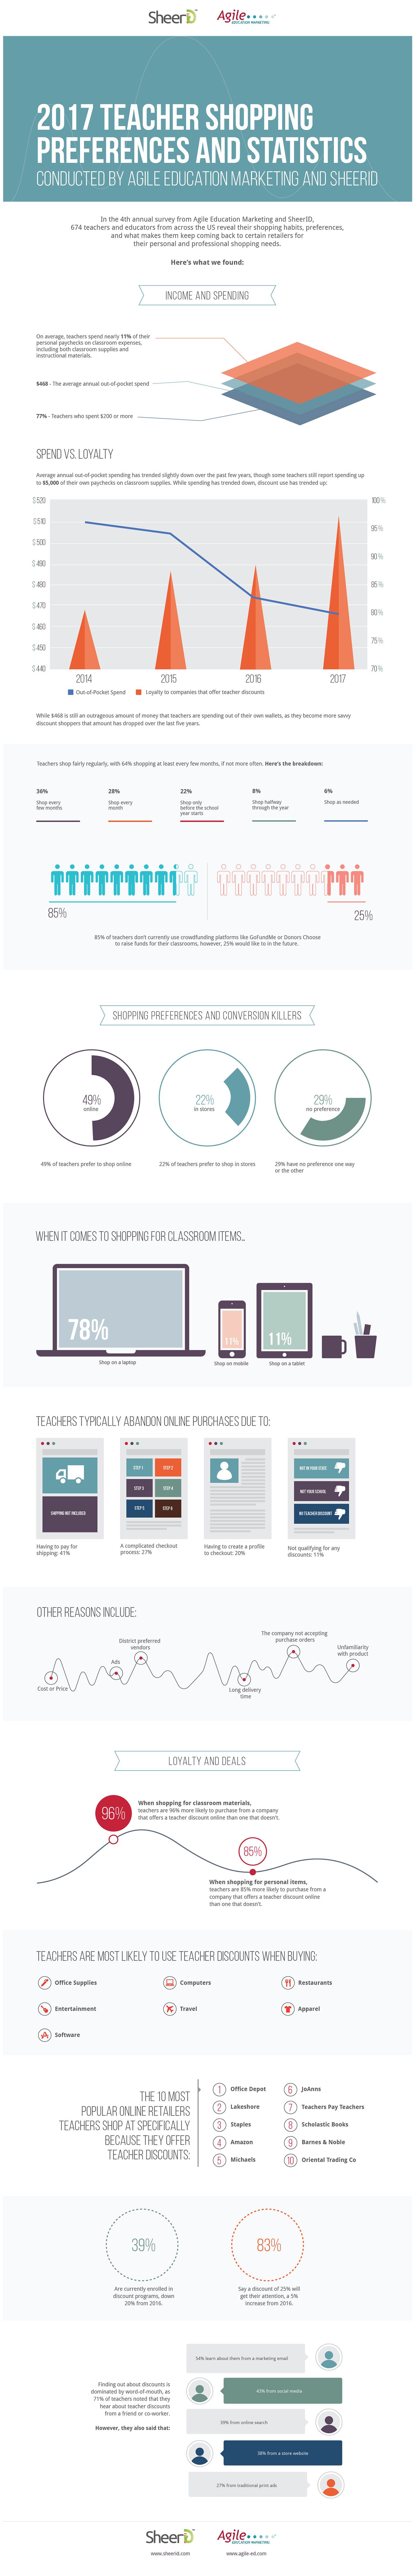 Annual Teacher Shopping Survey from SheerID and Agile Education Marketing Infographic